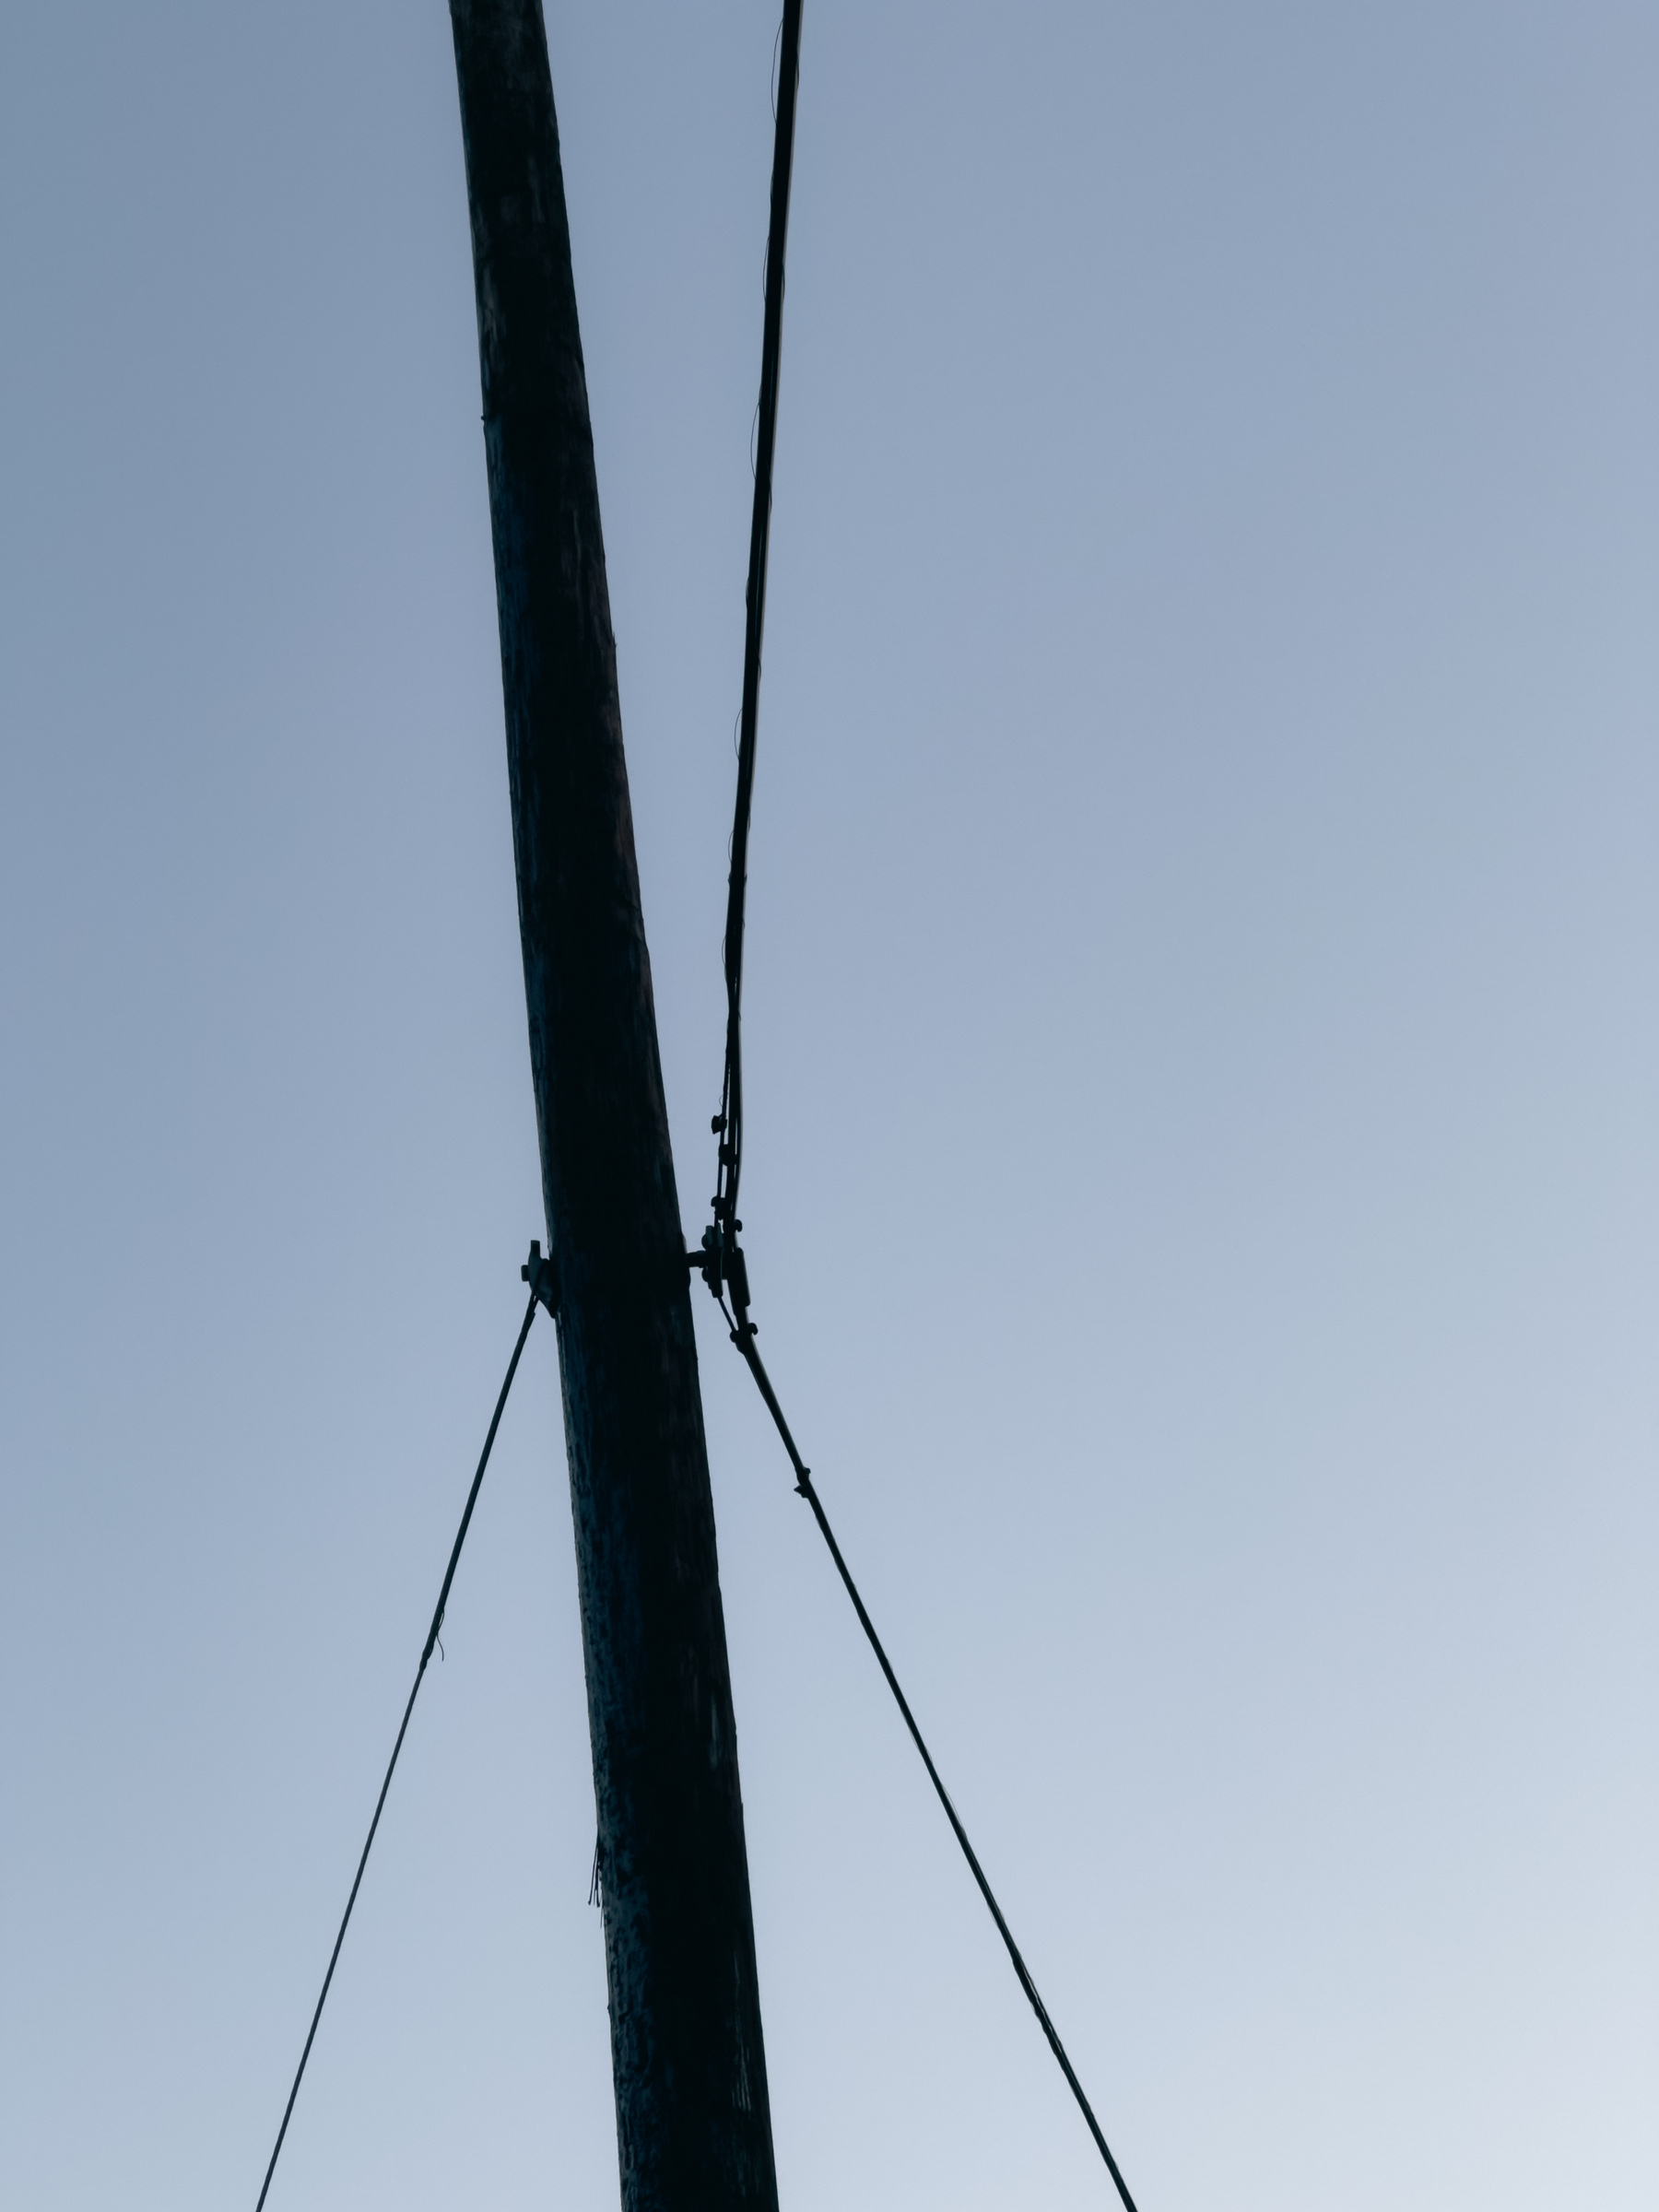 Utility pole with wires running from bottom to top of frame and silhouetted against the early morning sky.